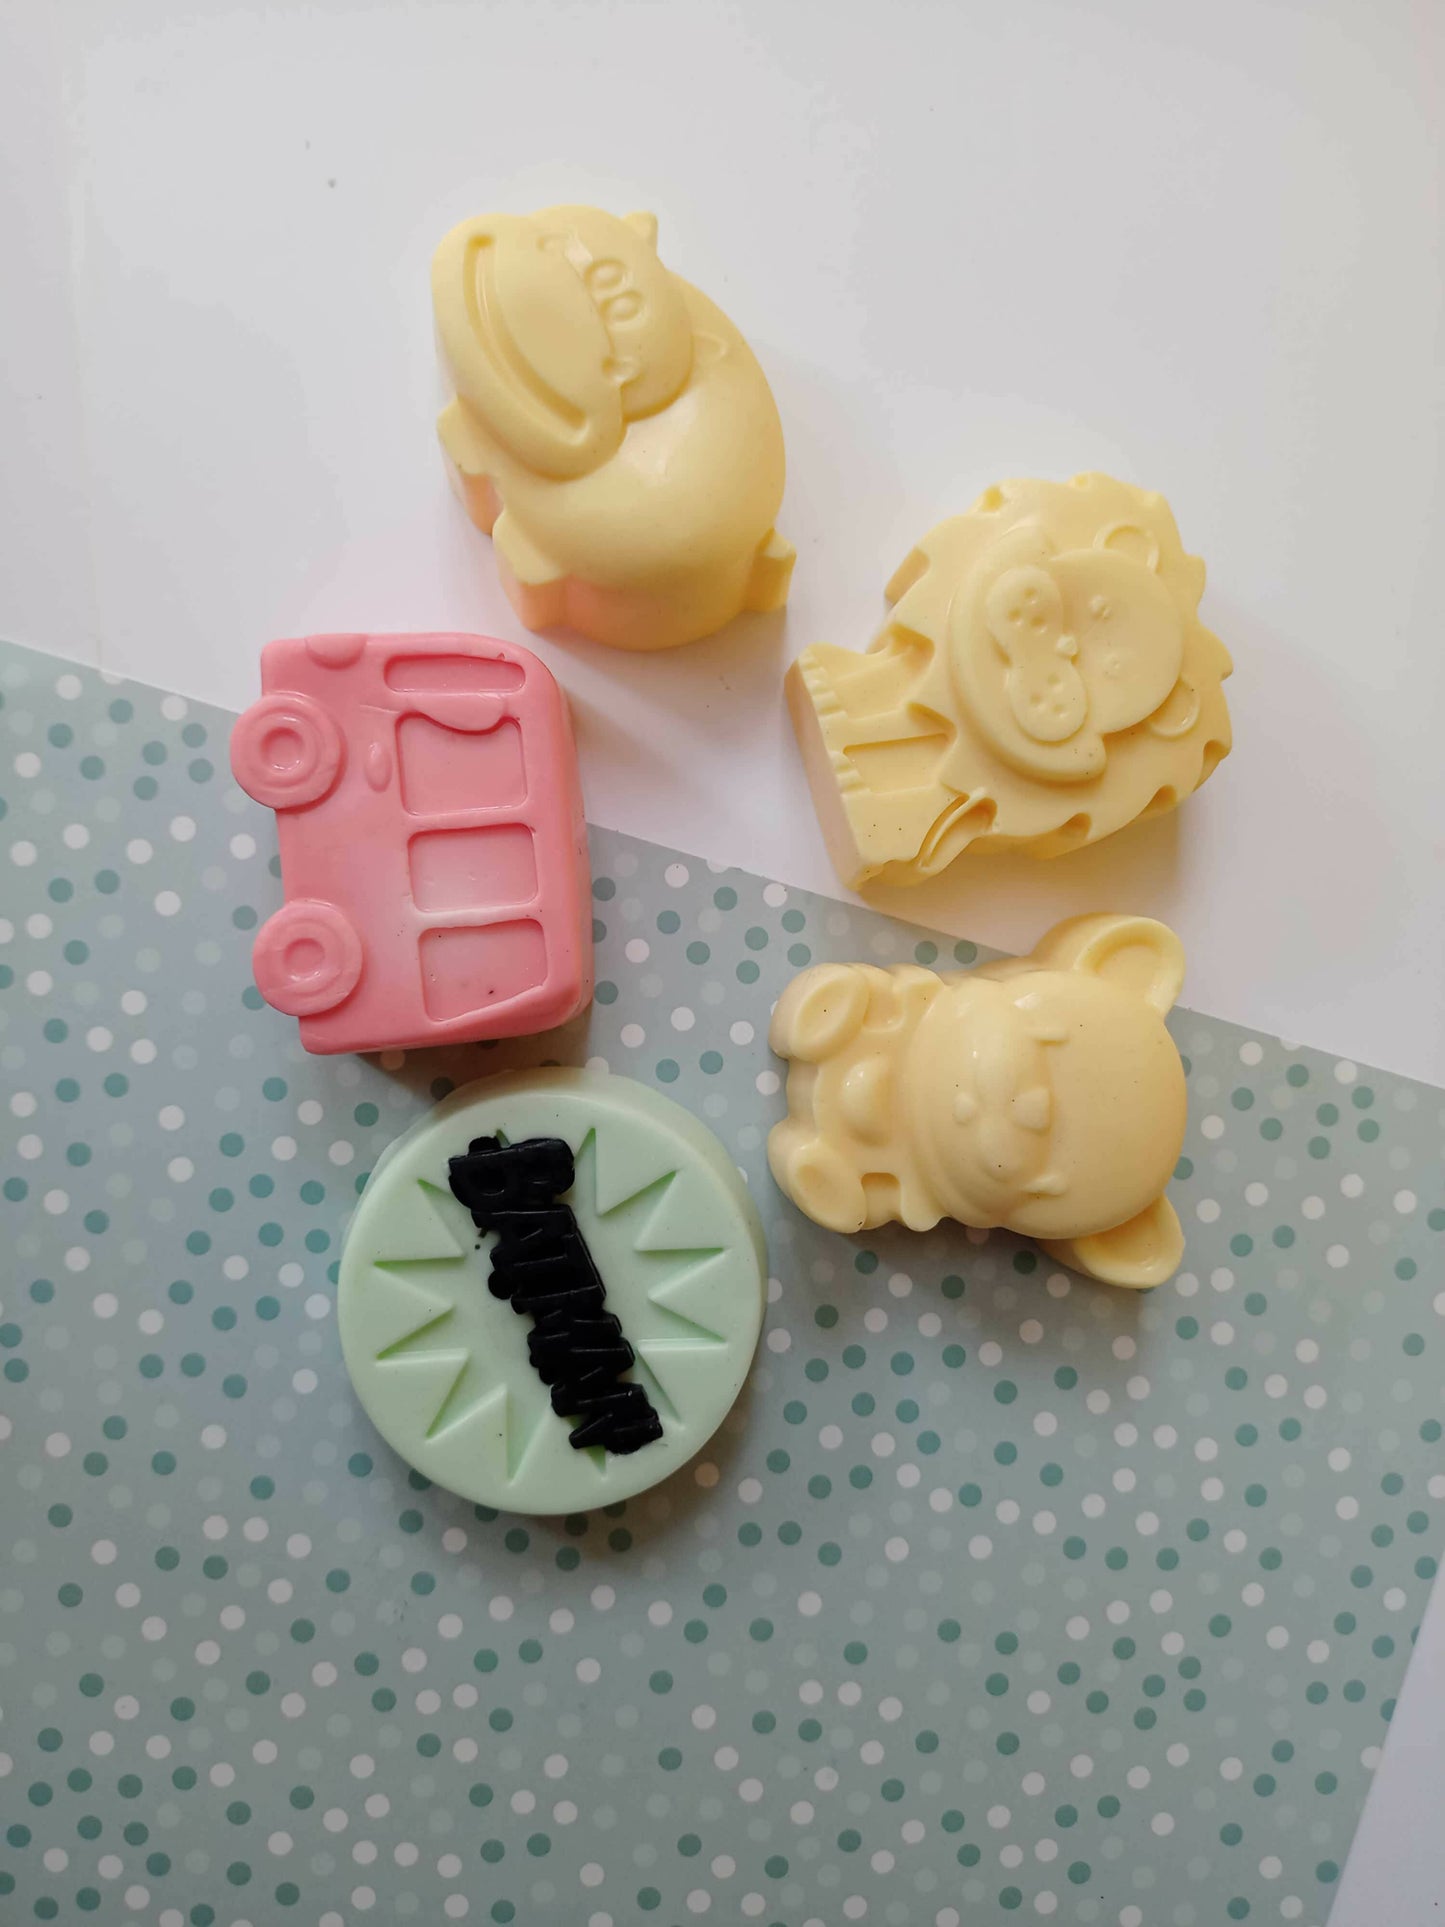 Kids cartoon mixed animals and cars toy shaped soaps set of 4